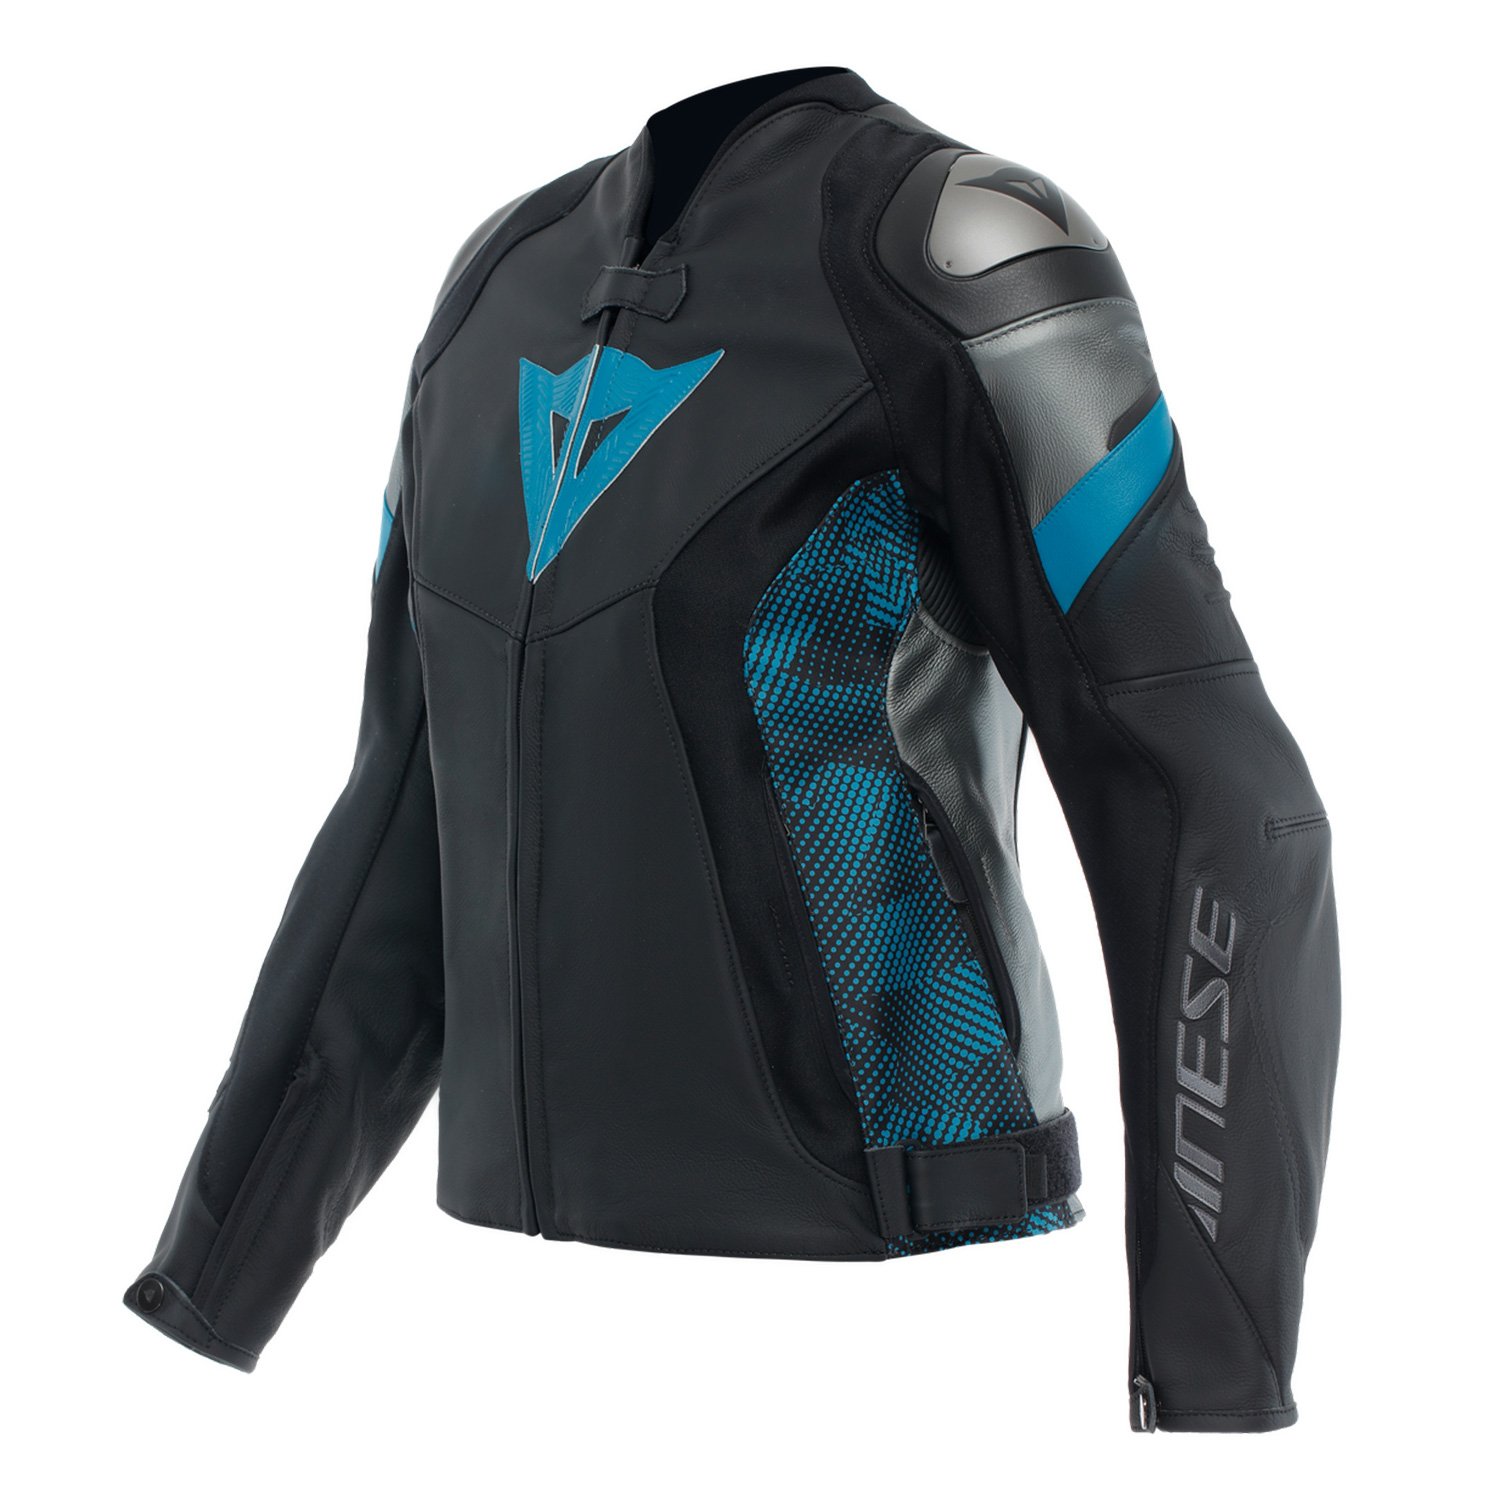 Image of Dainese Avro 5 Leather Jacket WMN Black Teal Anthracite Talla 40